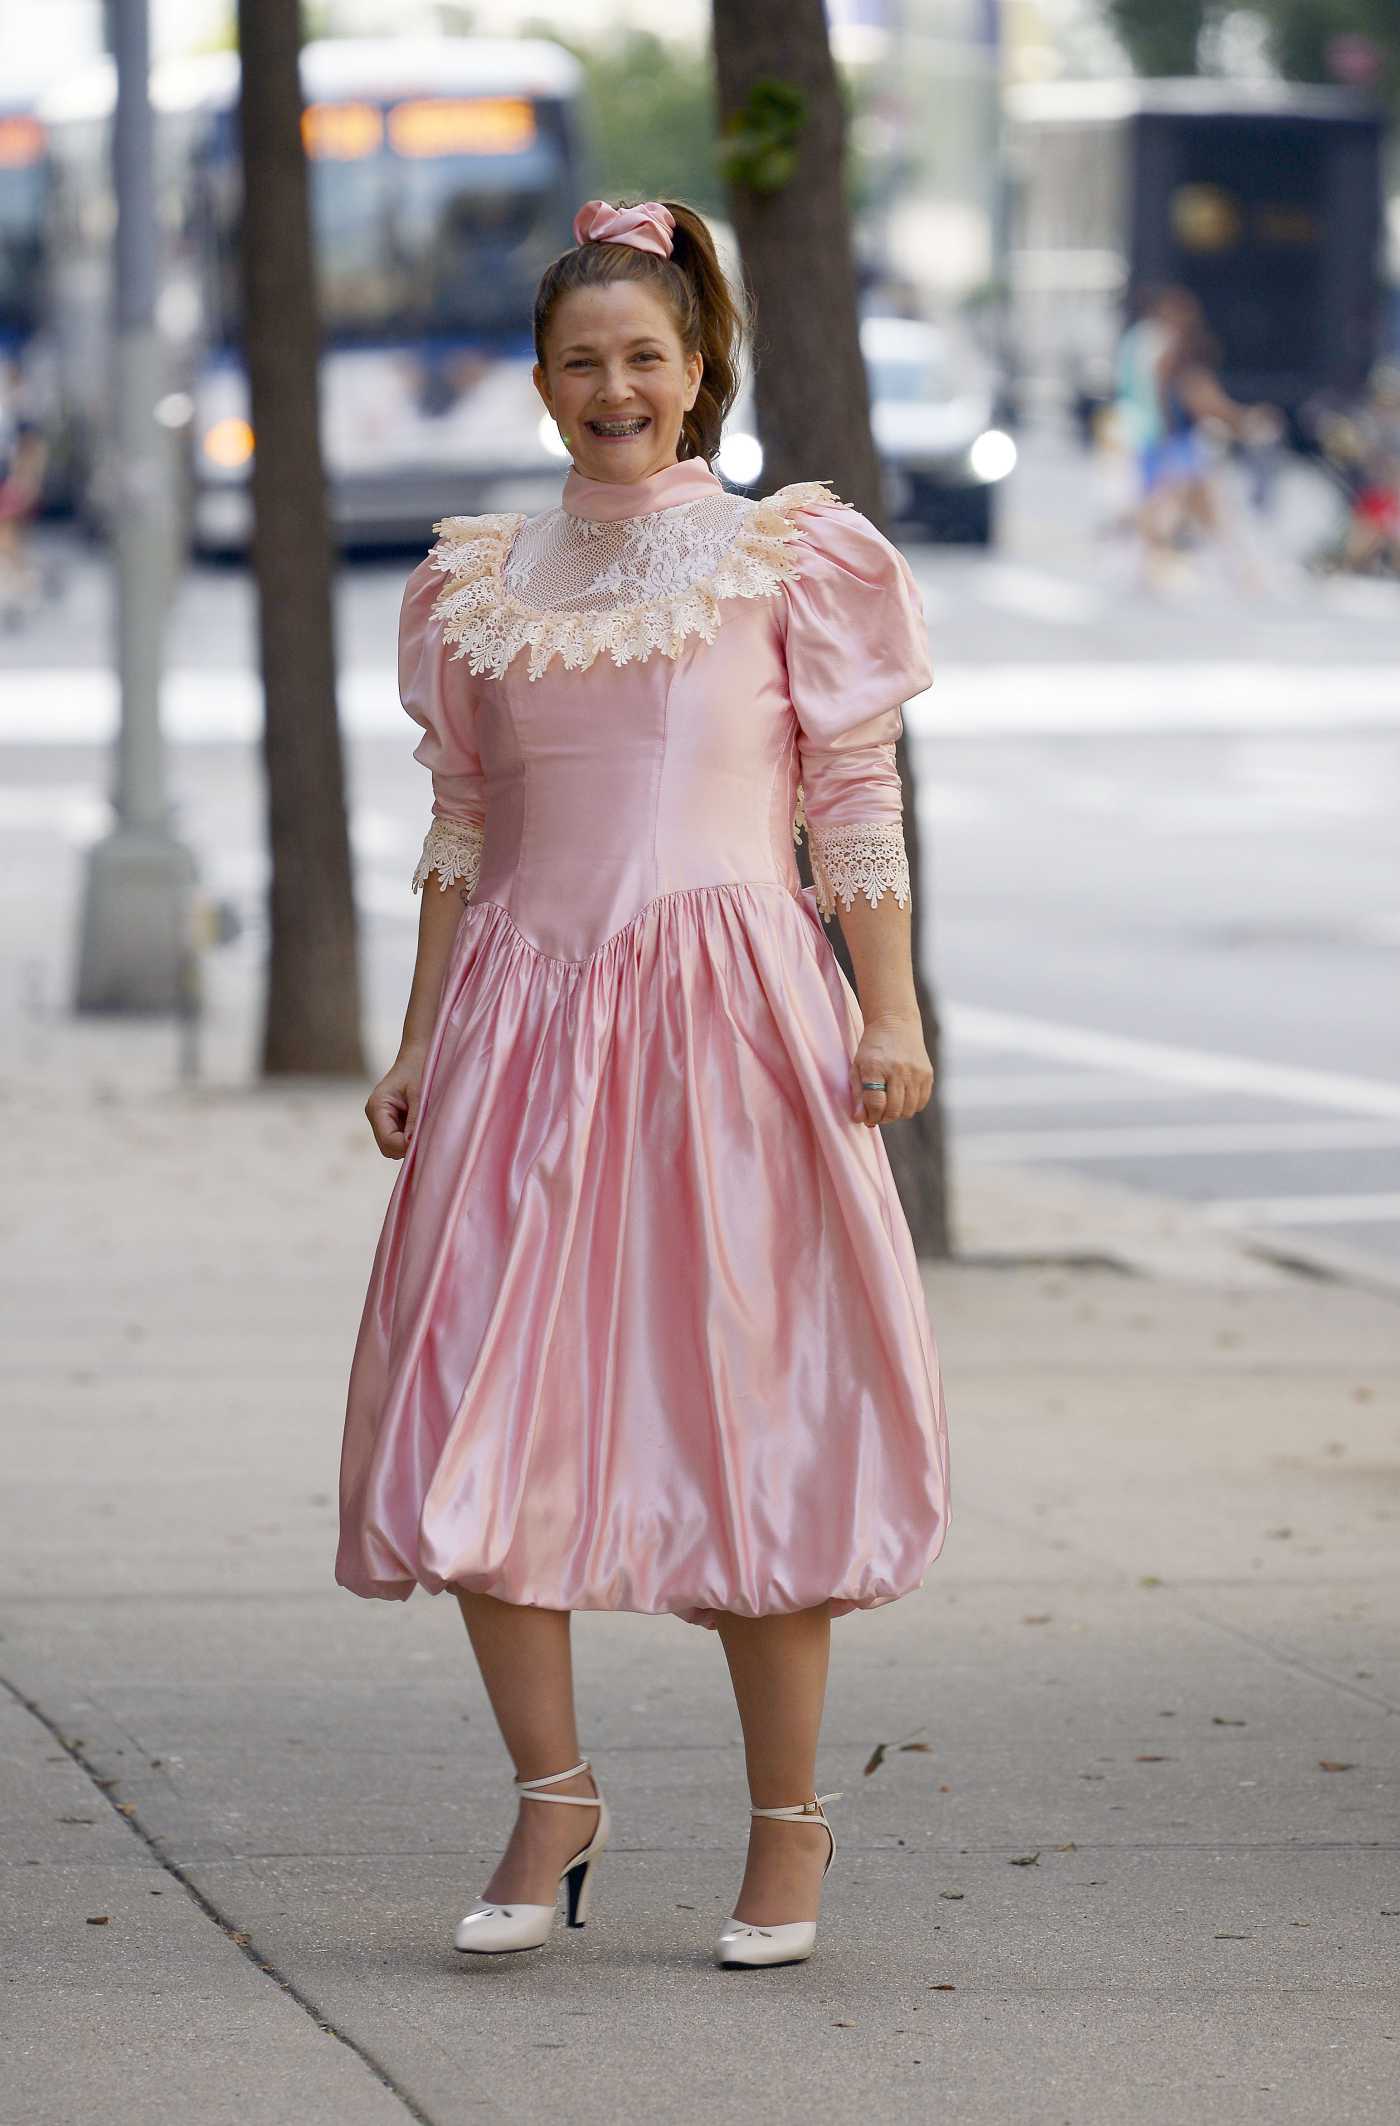 Drew Barrymore in a Pink Dress on the Set of Unknown Project in New York 08/25/2021